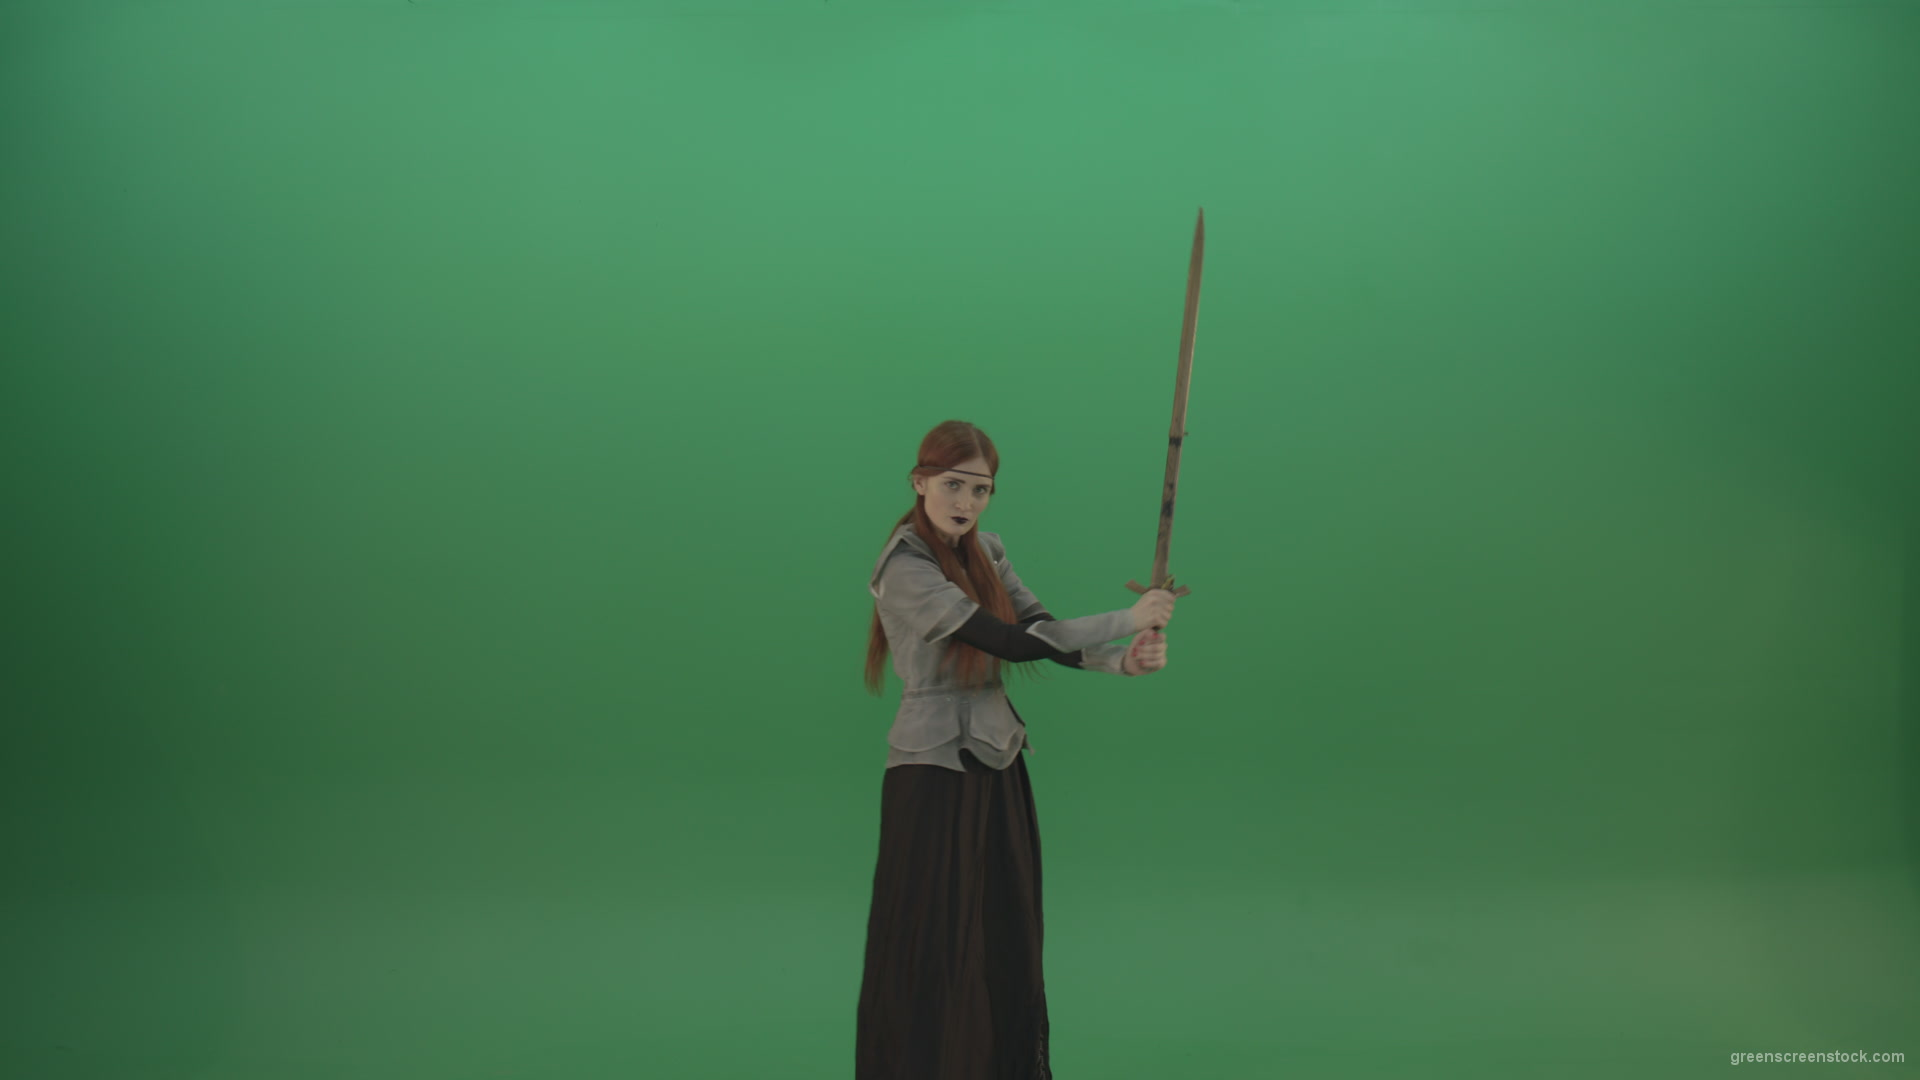 Swinging-on-a-green-background-with-a-sword-the-girl-gracefully-shows-her-strength_008 Green Screen Stock